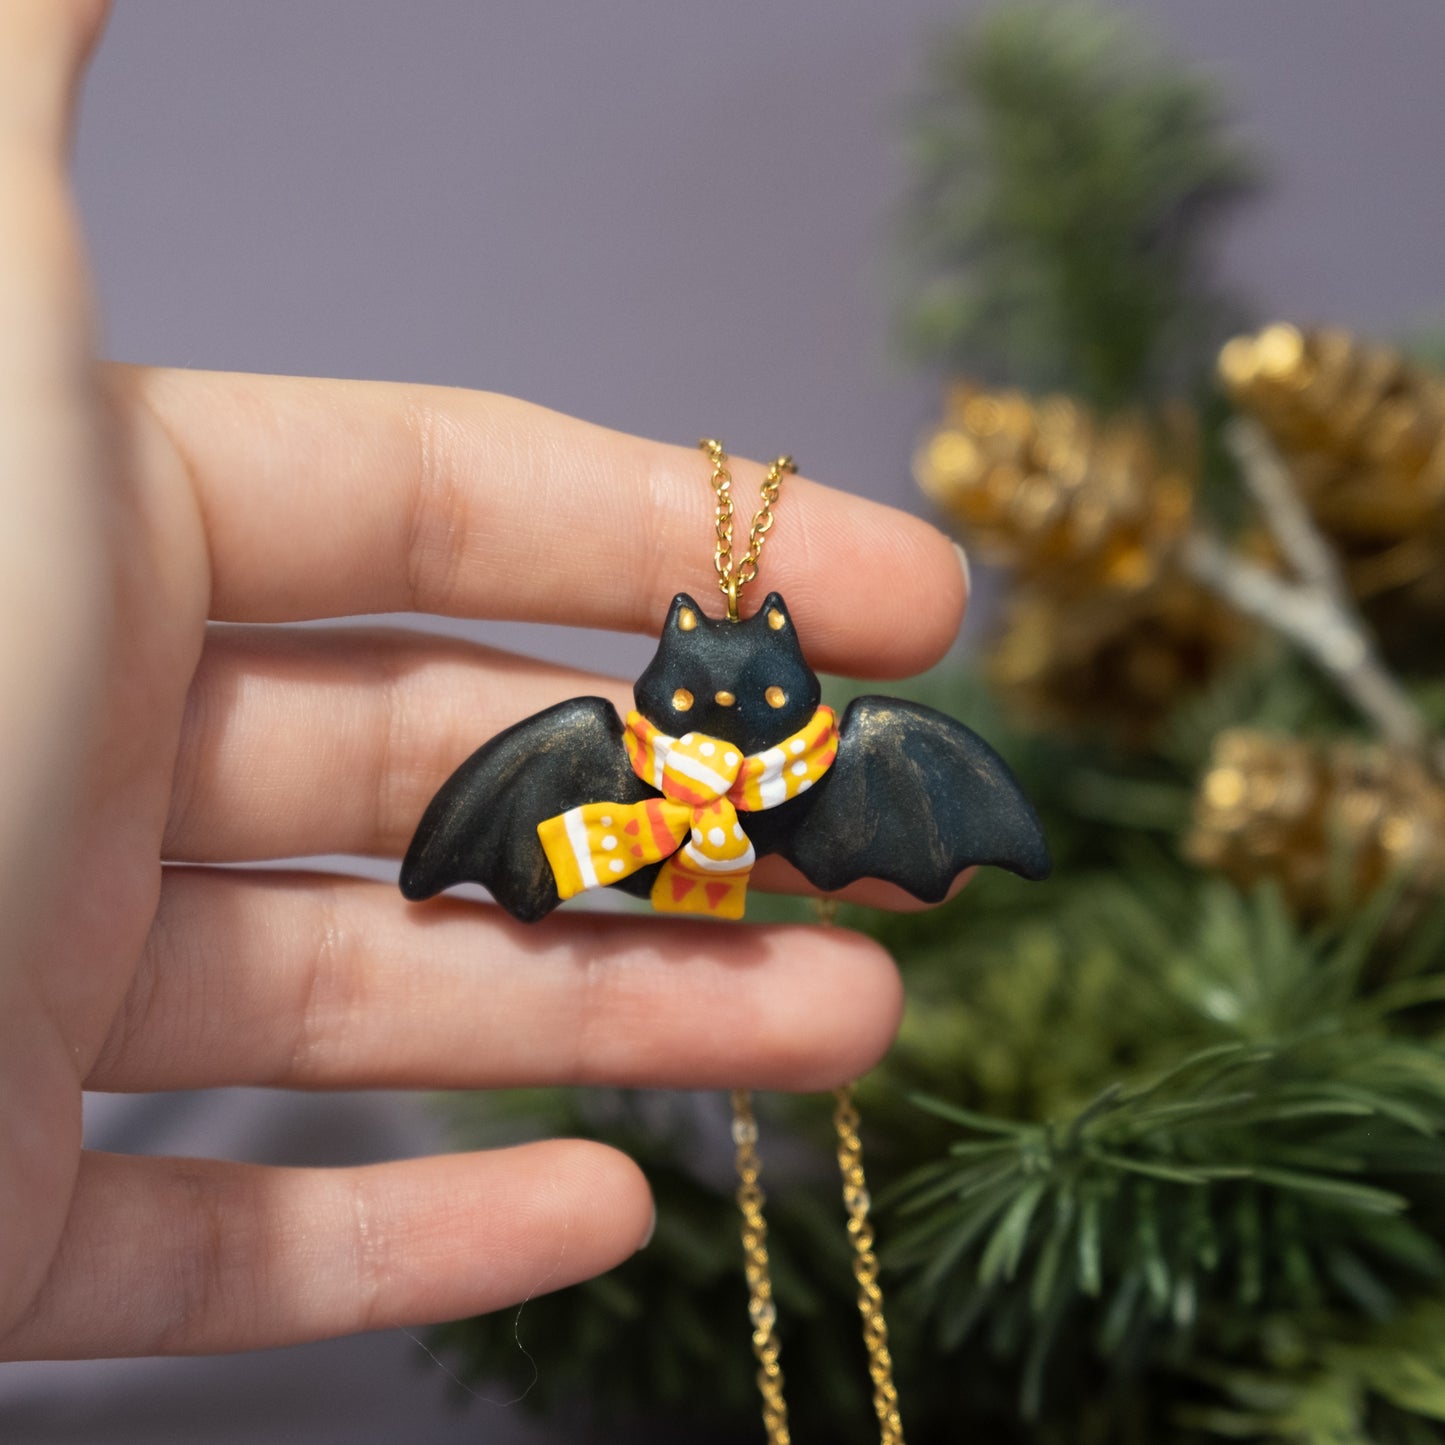 Winter Bat Necklace in Polymer Clay